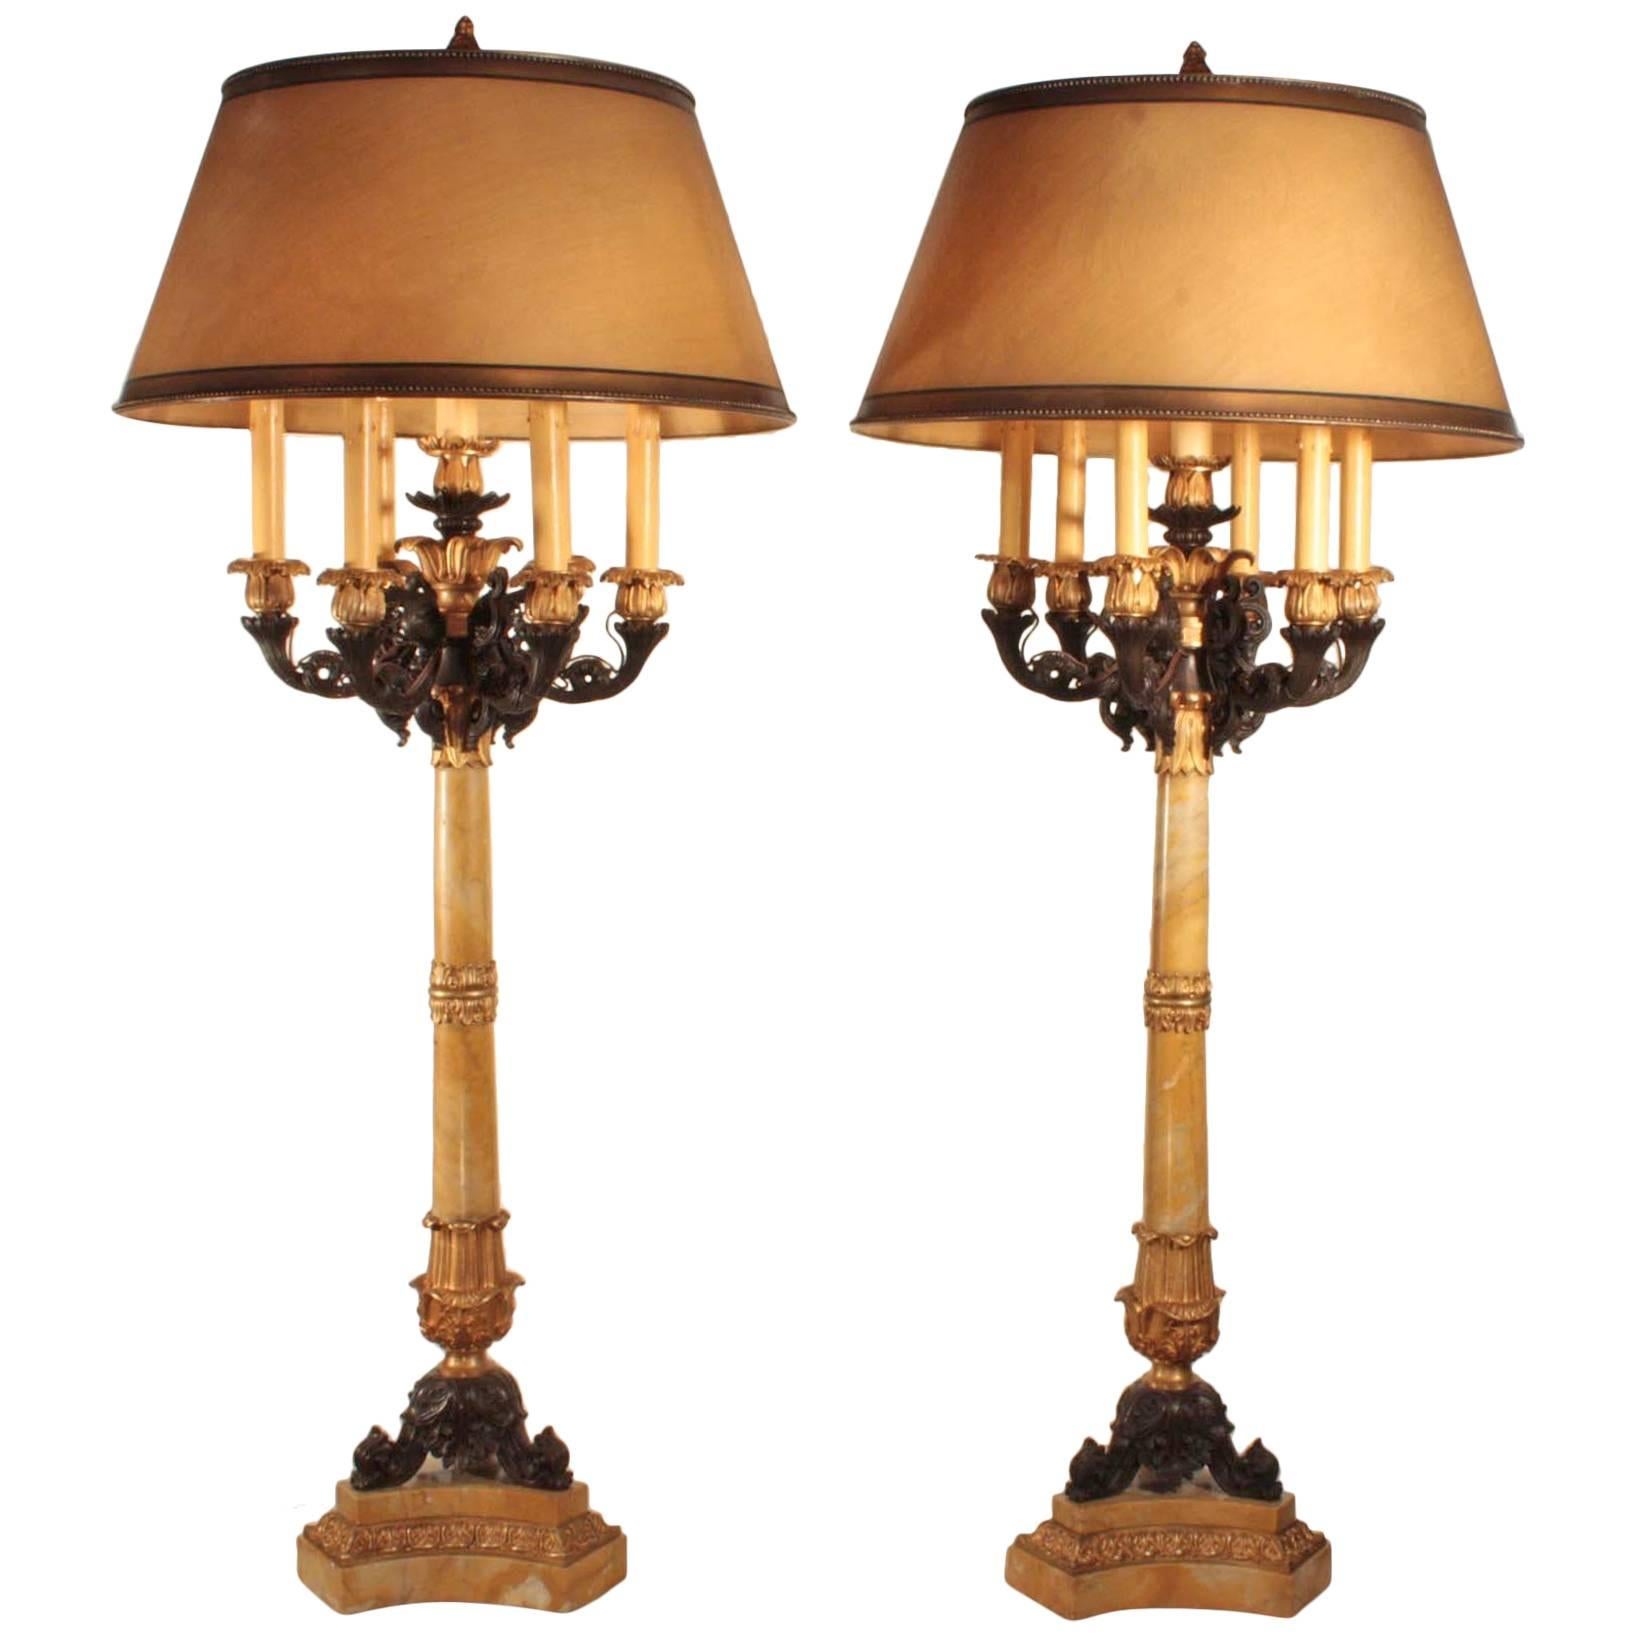 Pair of Impressive French Restauration Candelabra Mounted as Lamps